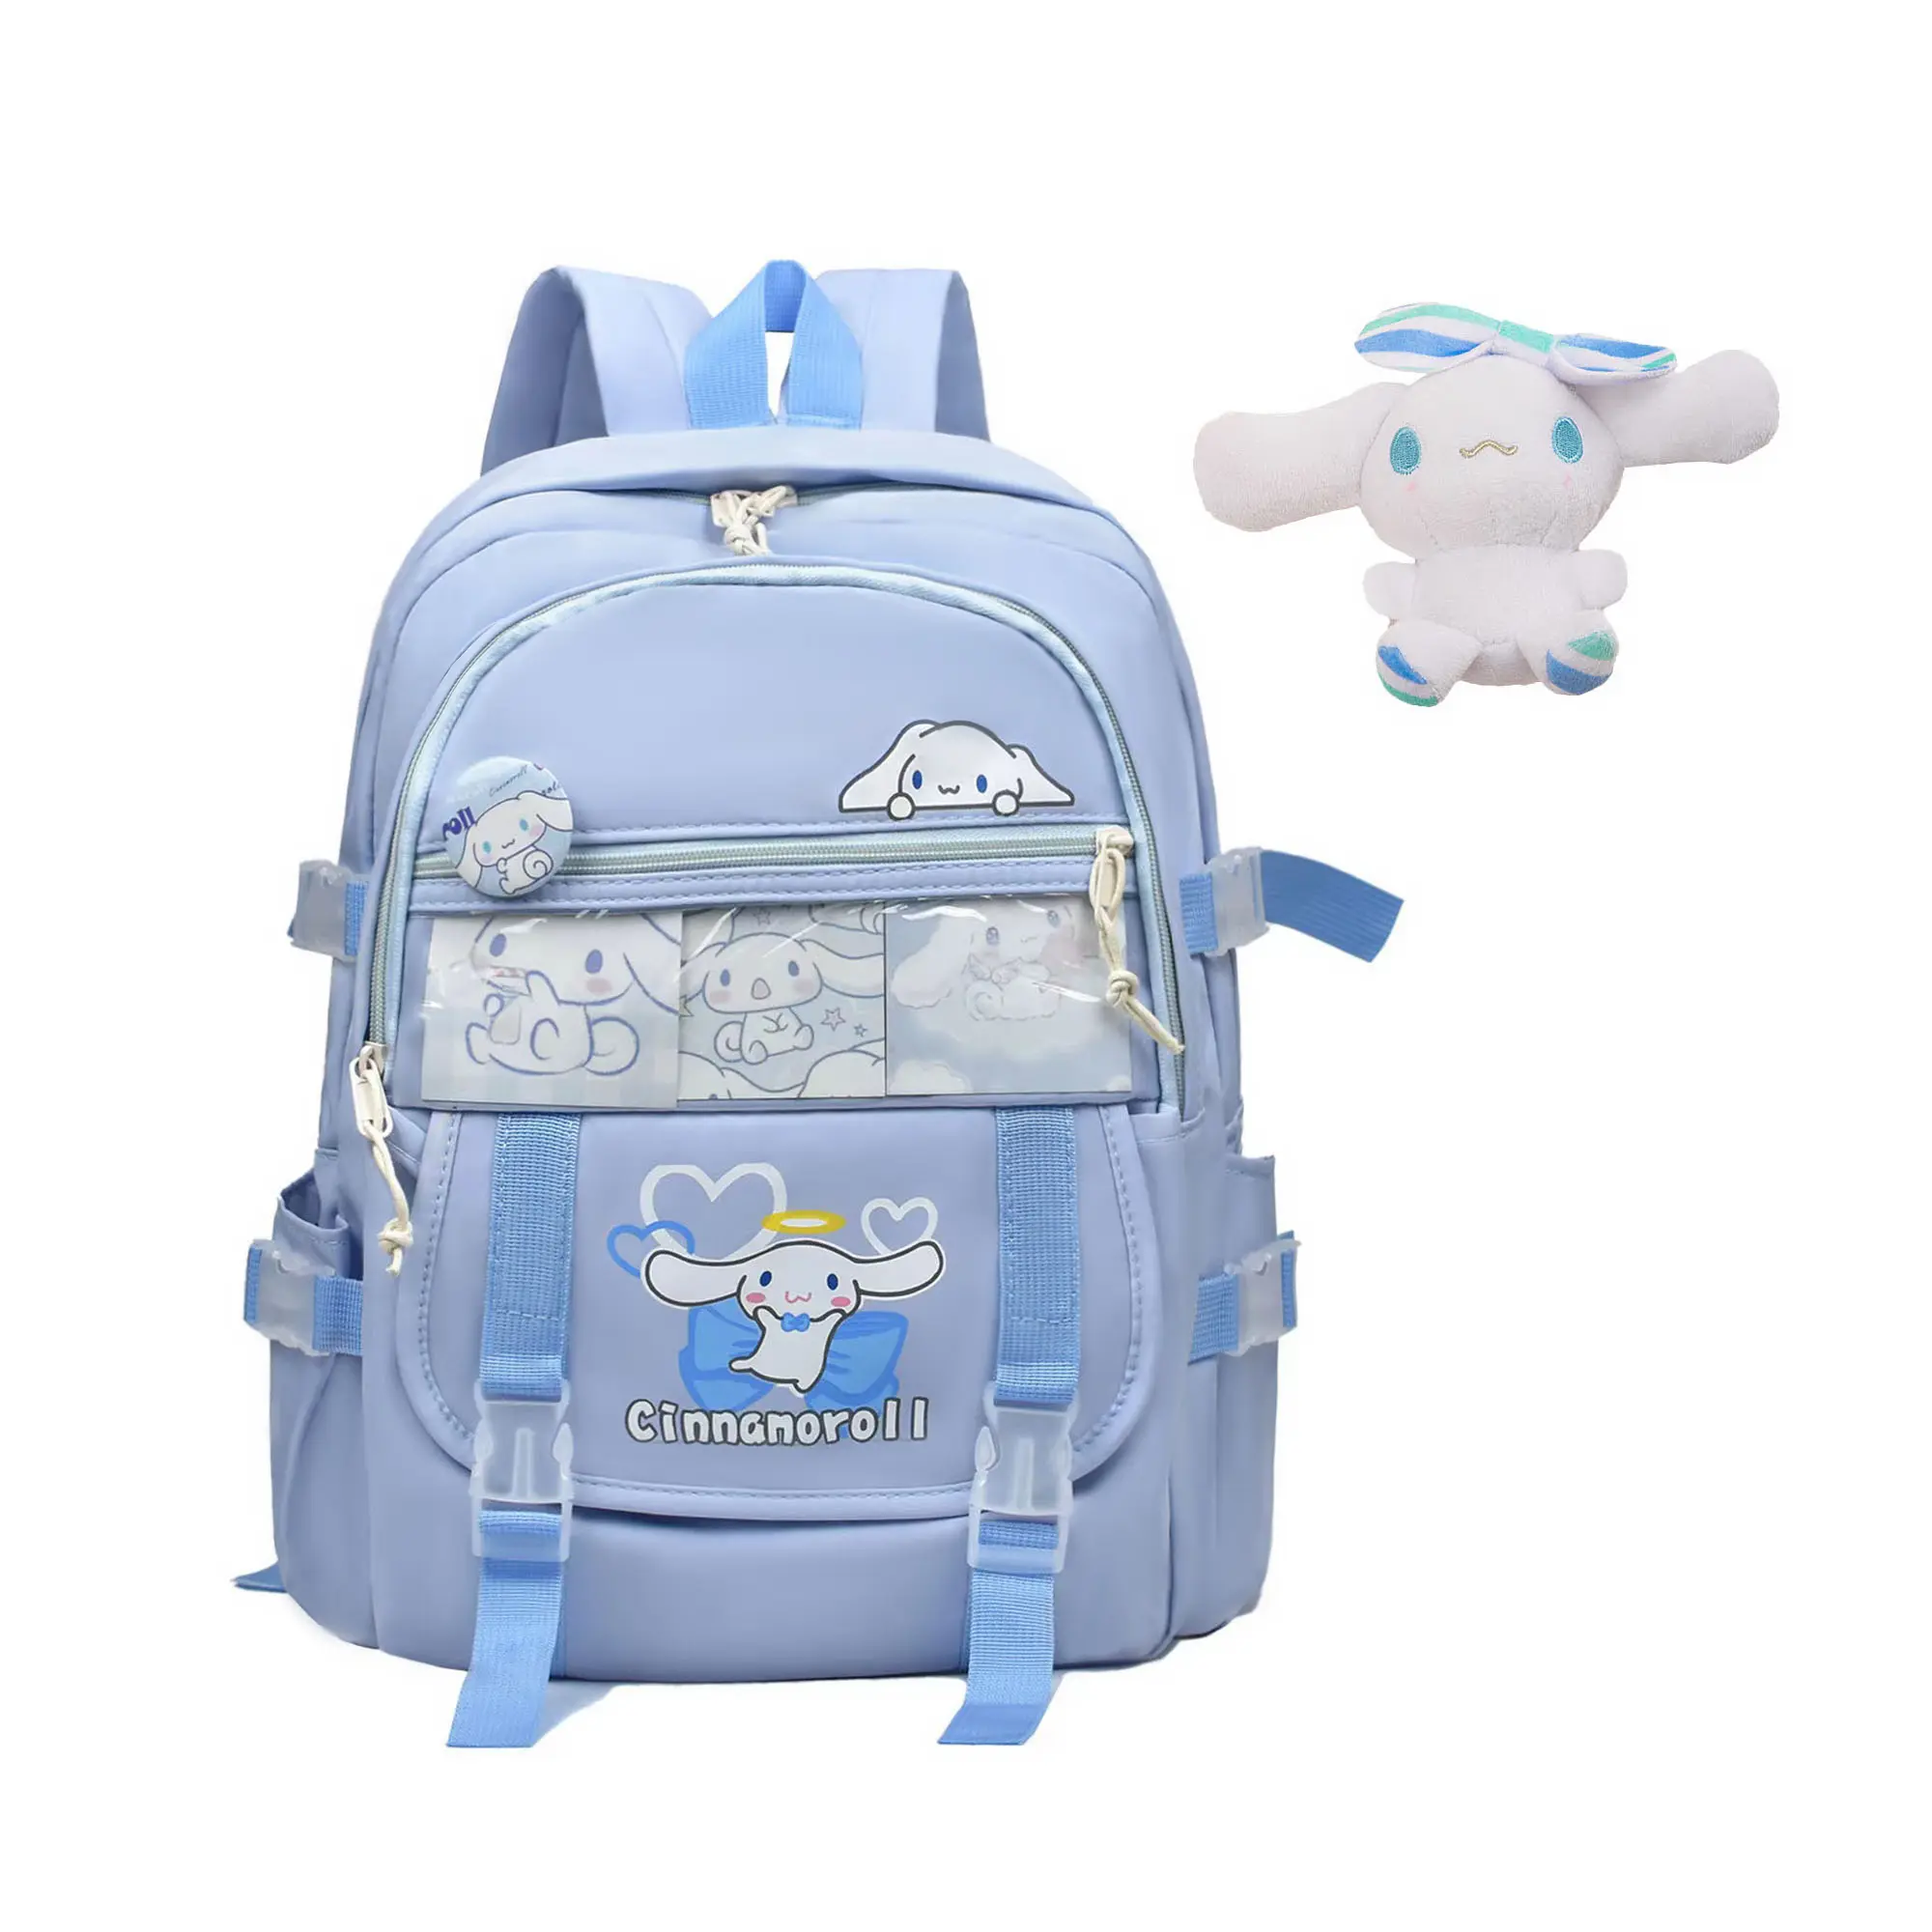 Cute Cool Backpack for Girls Cartoon Backpack with Cinnamoroll Kawaii Pins Accessories Middle School Students Bookbag Daypack